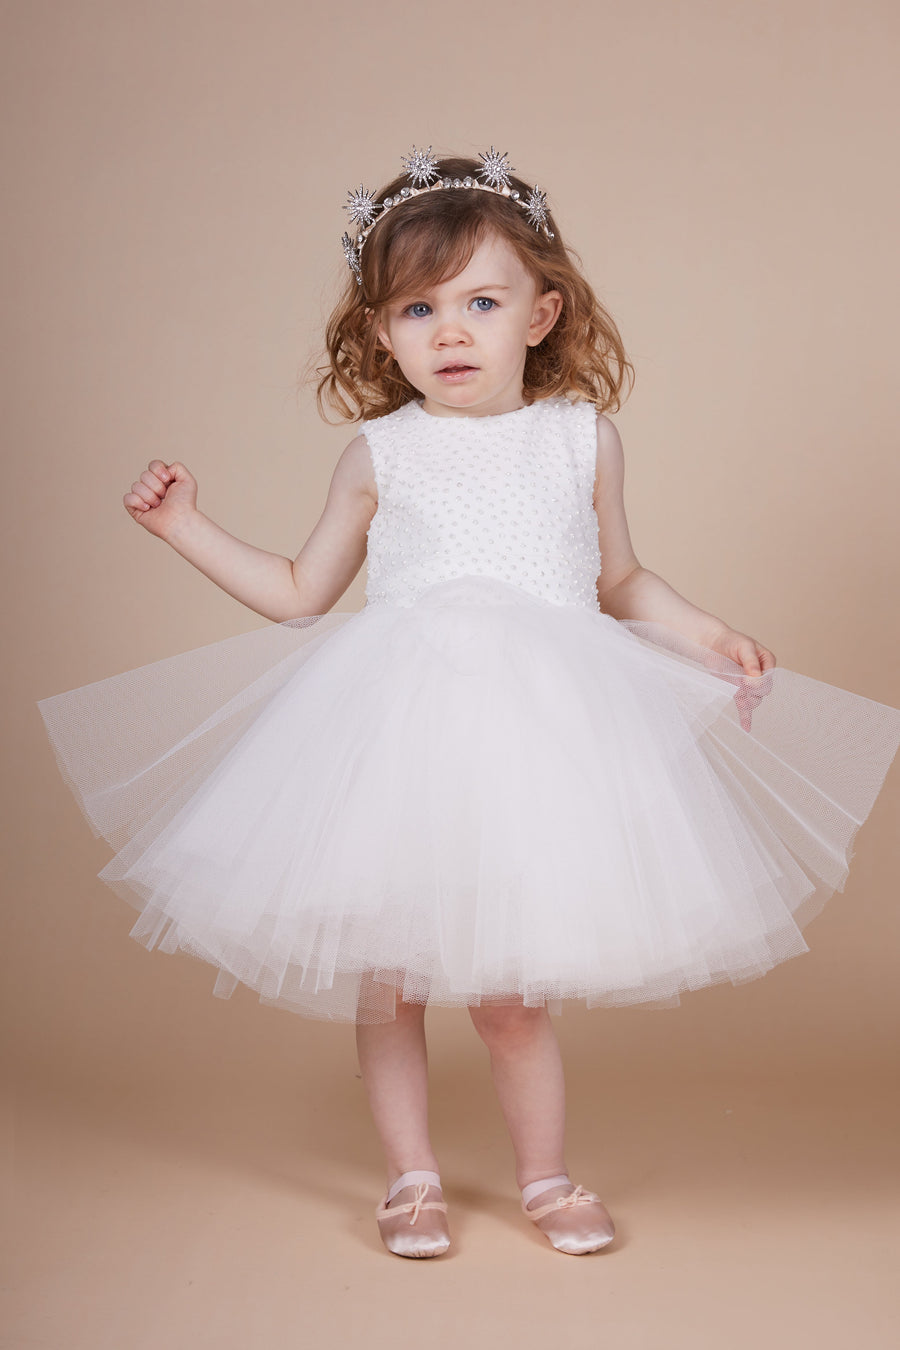 Ivy Ivory Sparkly Bow Tulle Mini Maid Dress - SALE